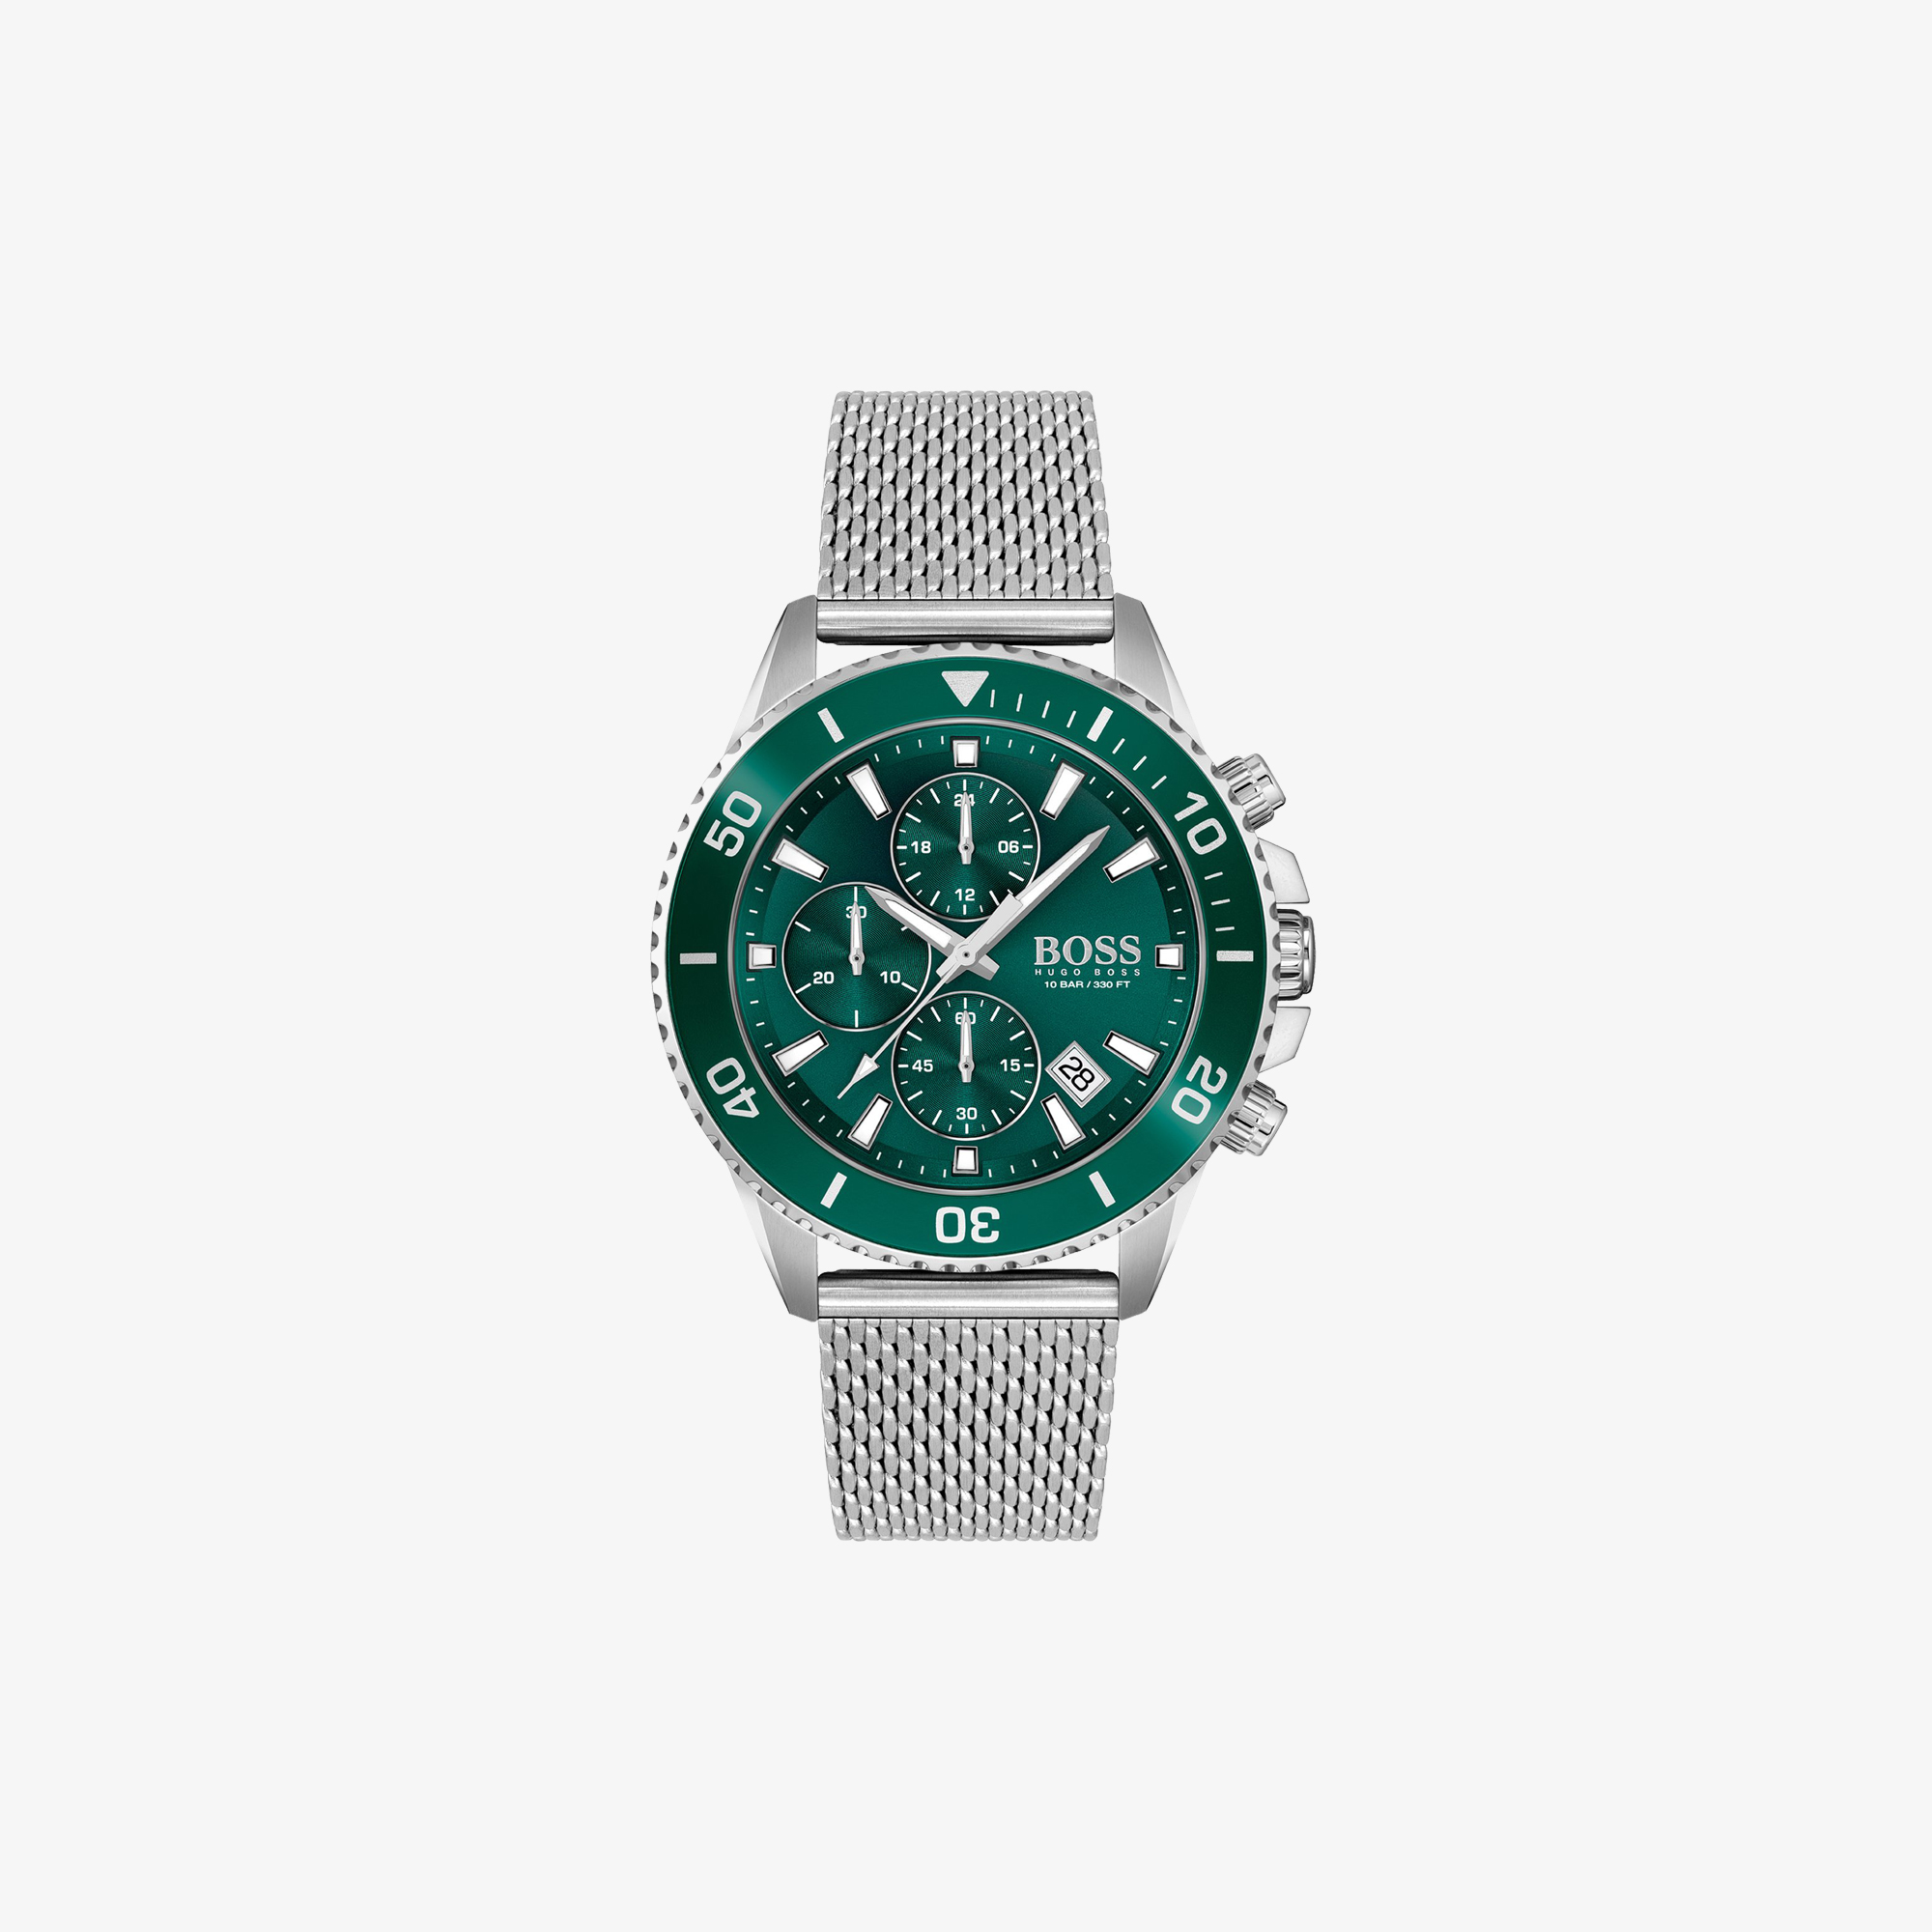 HUGO BOSS ADMIRAL CHRONOGRAPH WITH GREEN DIAL